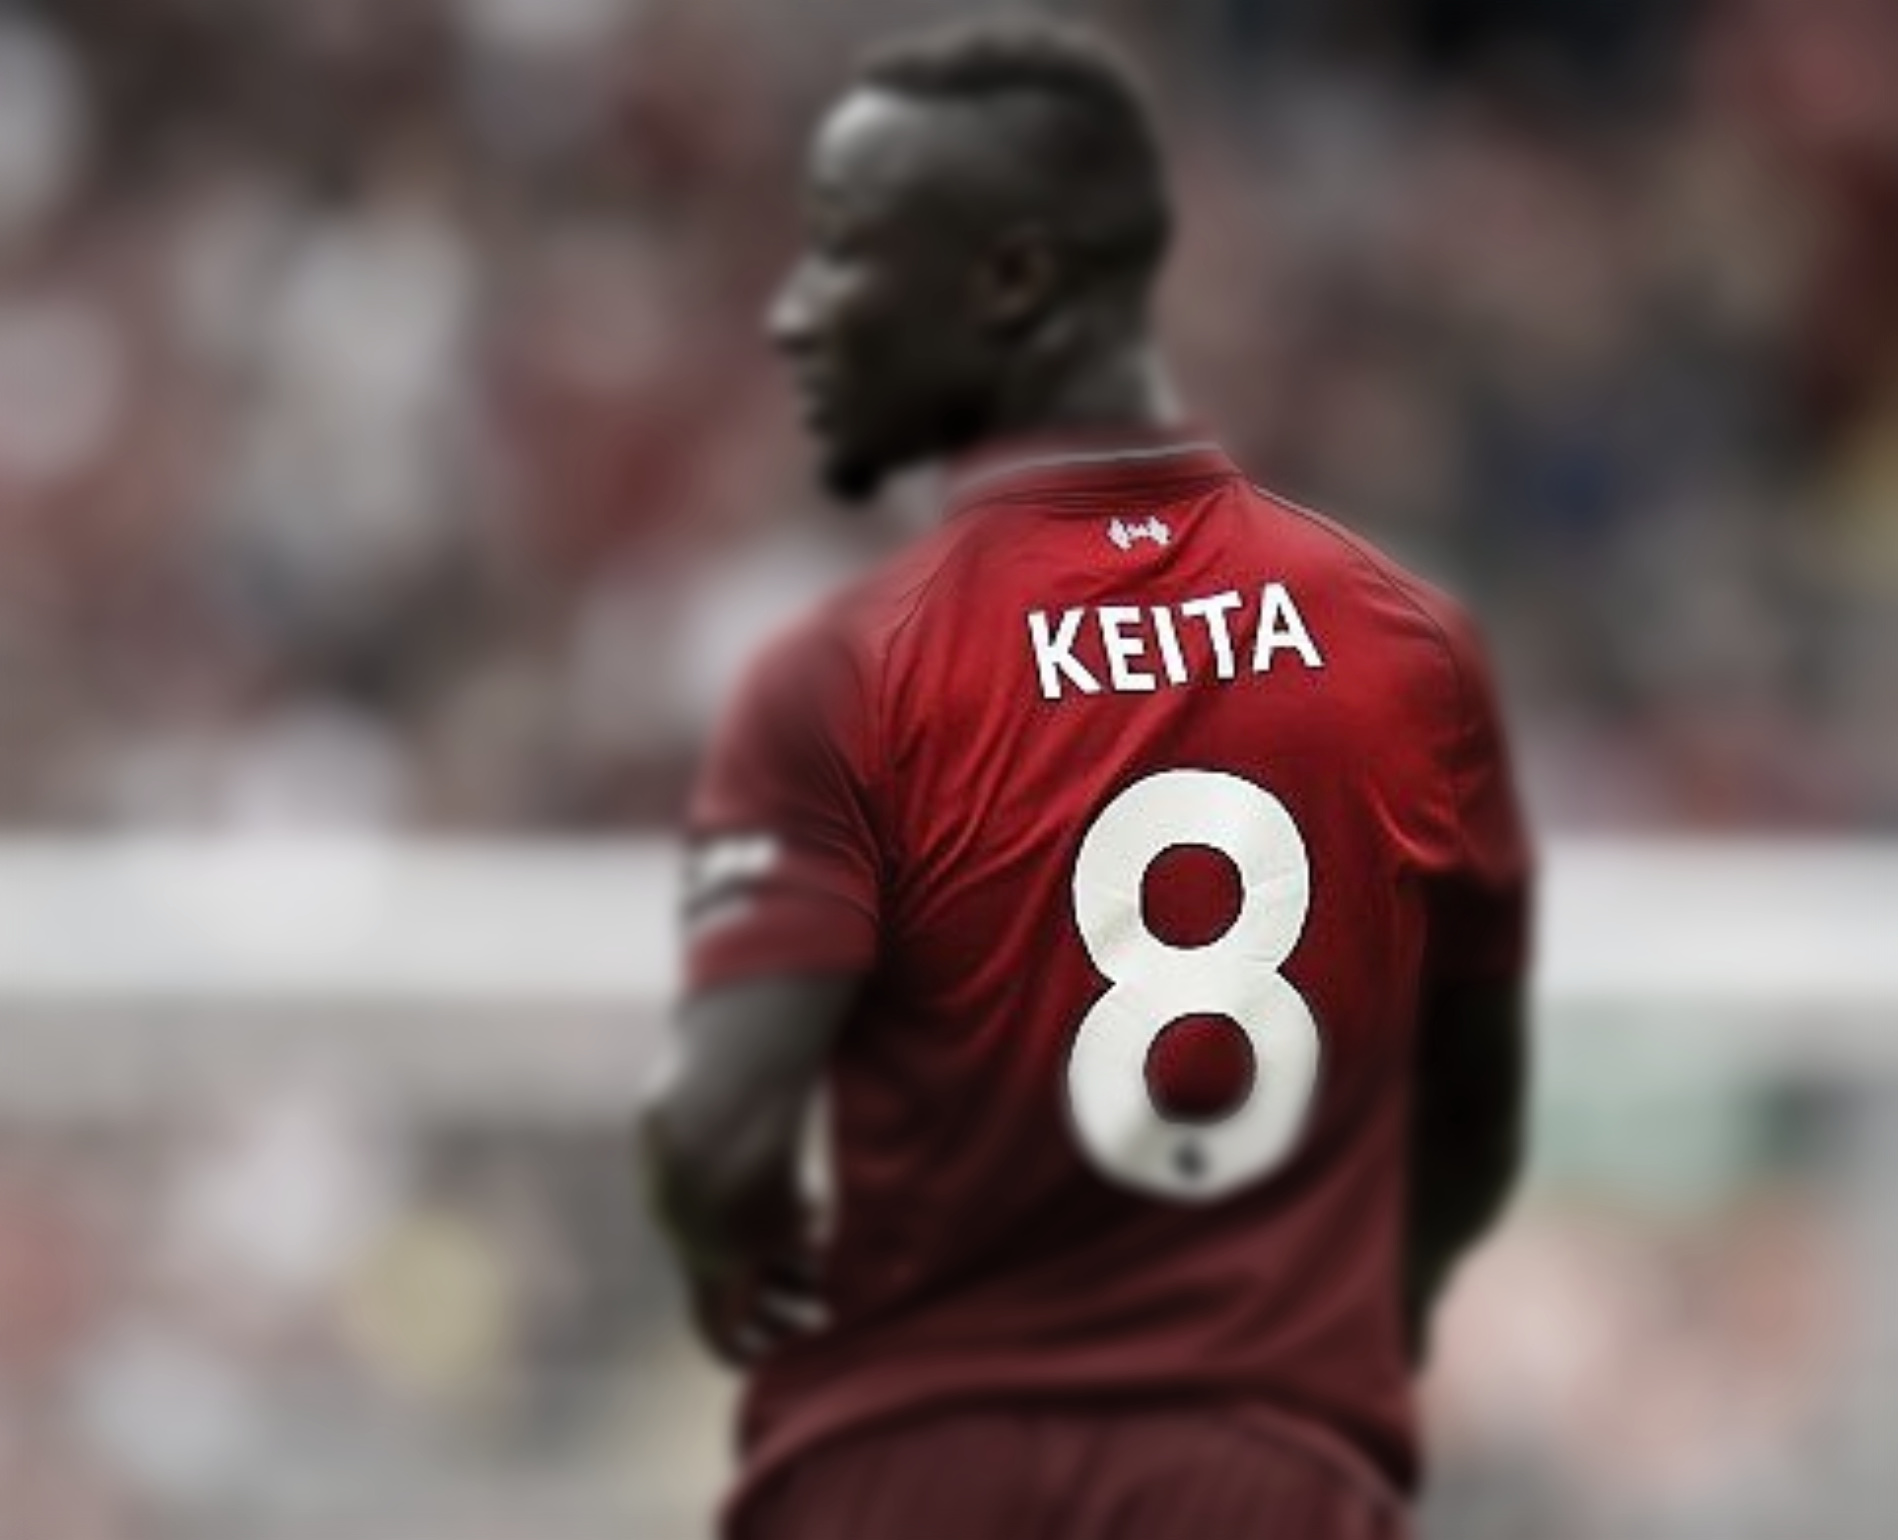 Naby Keita hitting form just at the right time as Liverpool chase glory in two fronts